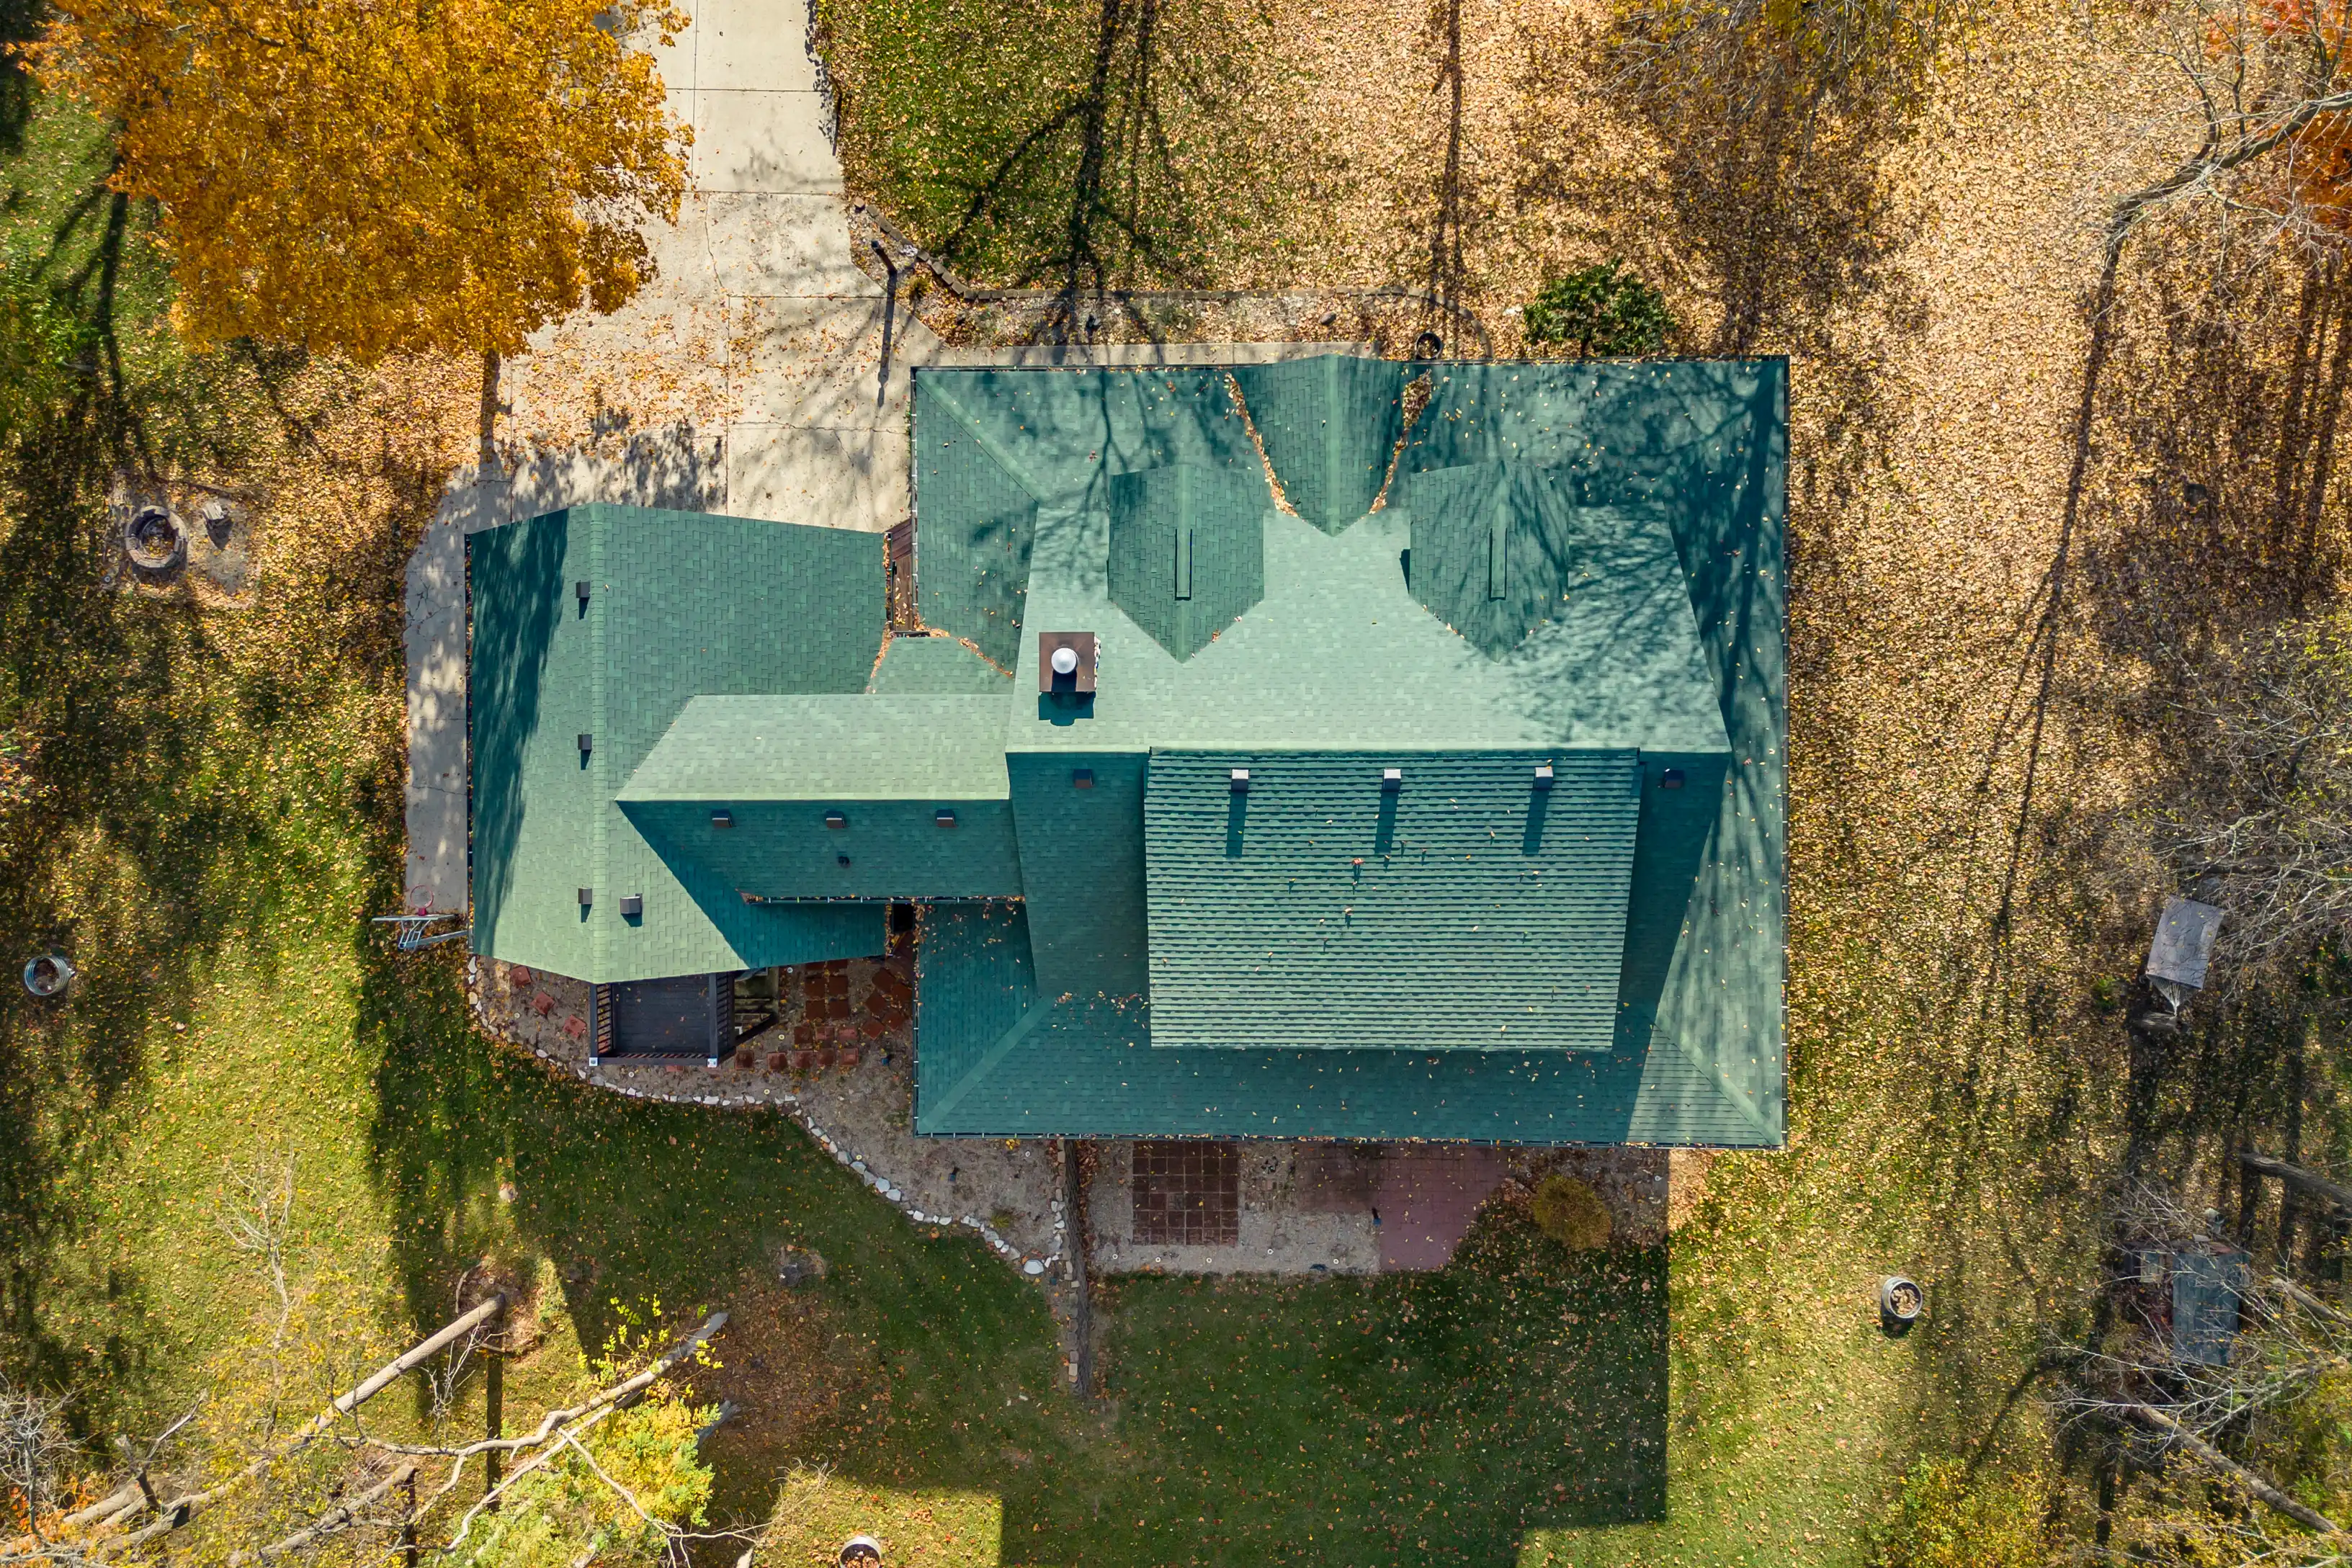 Aerial view of a house with a green roof surrounded by trees with autumn foliage and scattered leaves on the ground.